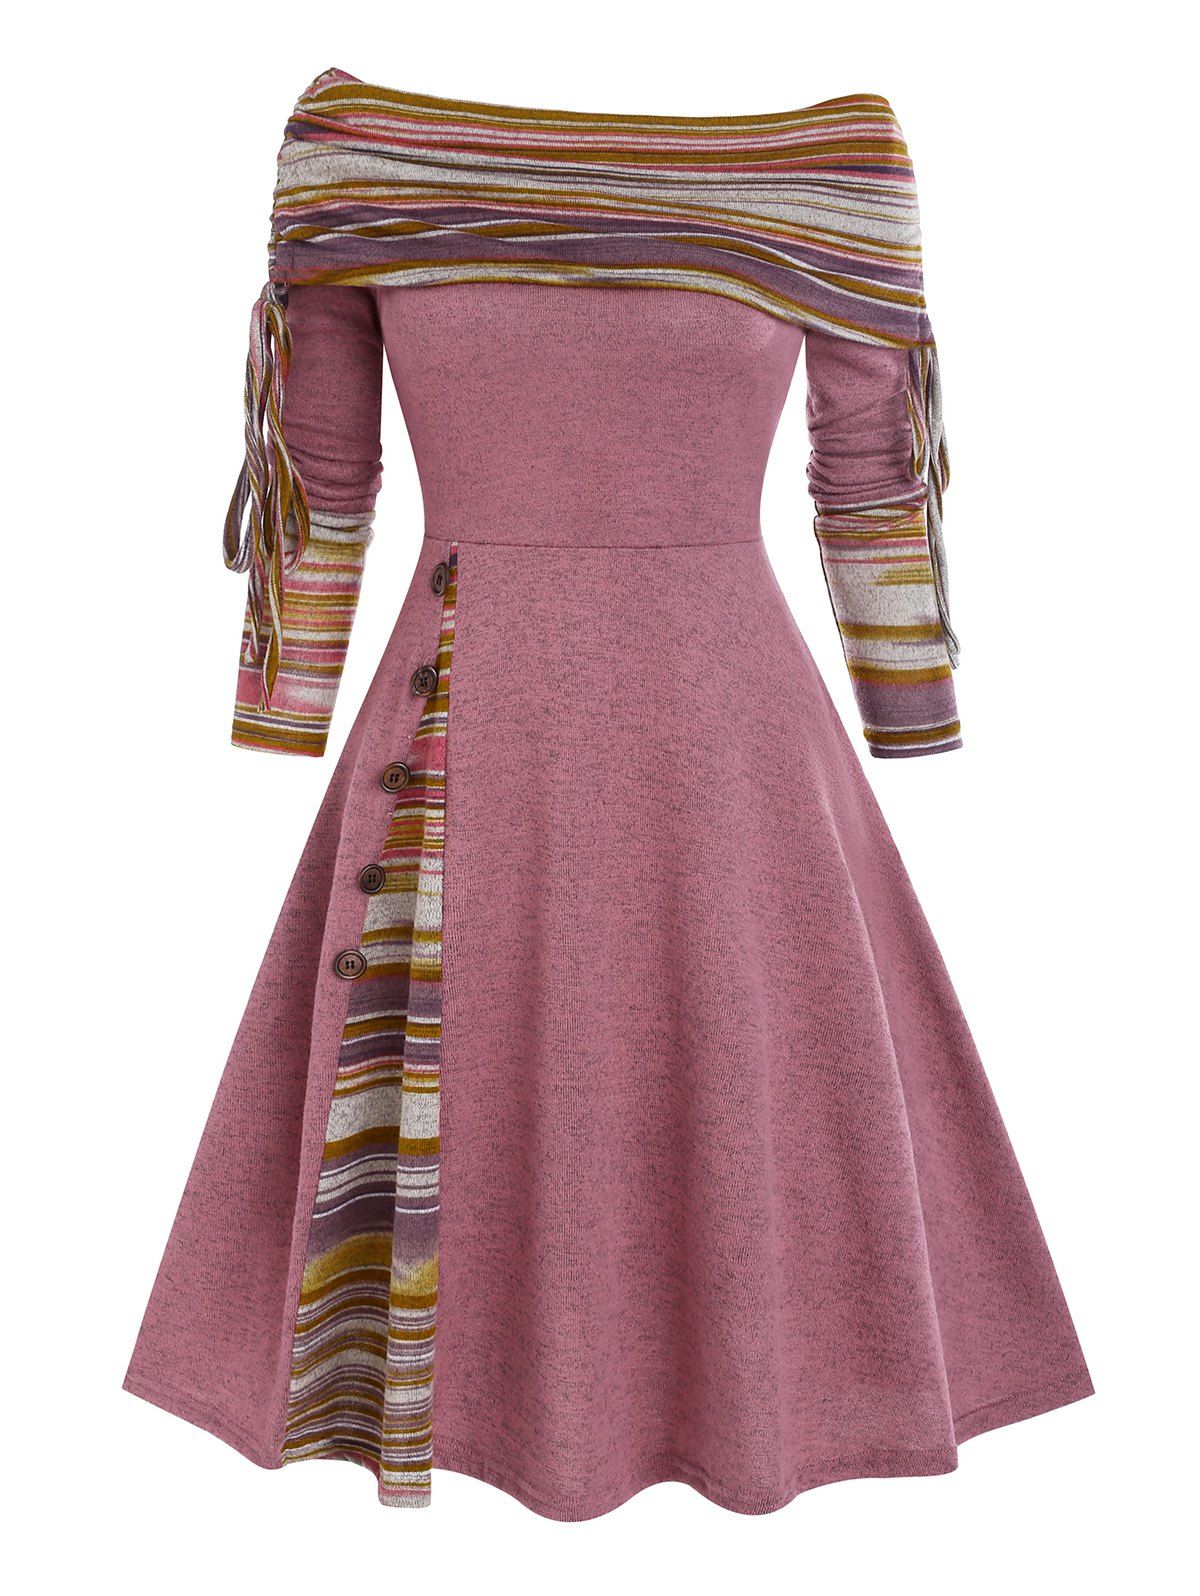 Convertible Neck Cinched Striped Flare Dress - LIGHT PINK XL